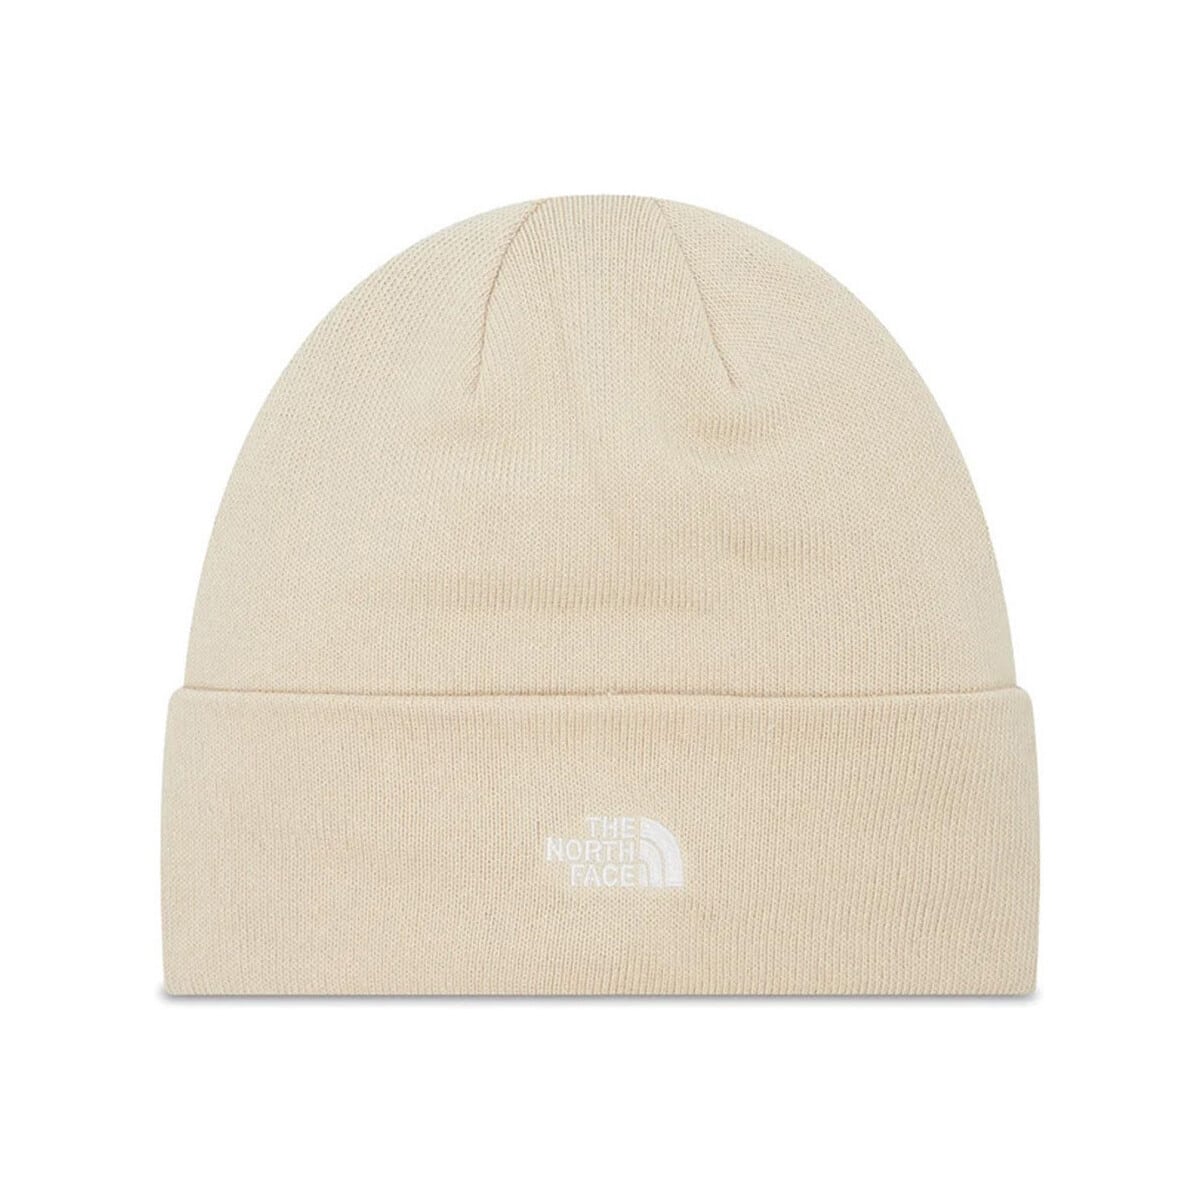 Muts The North Face Norm Beanie